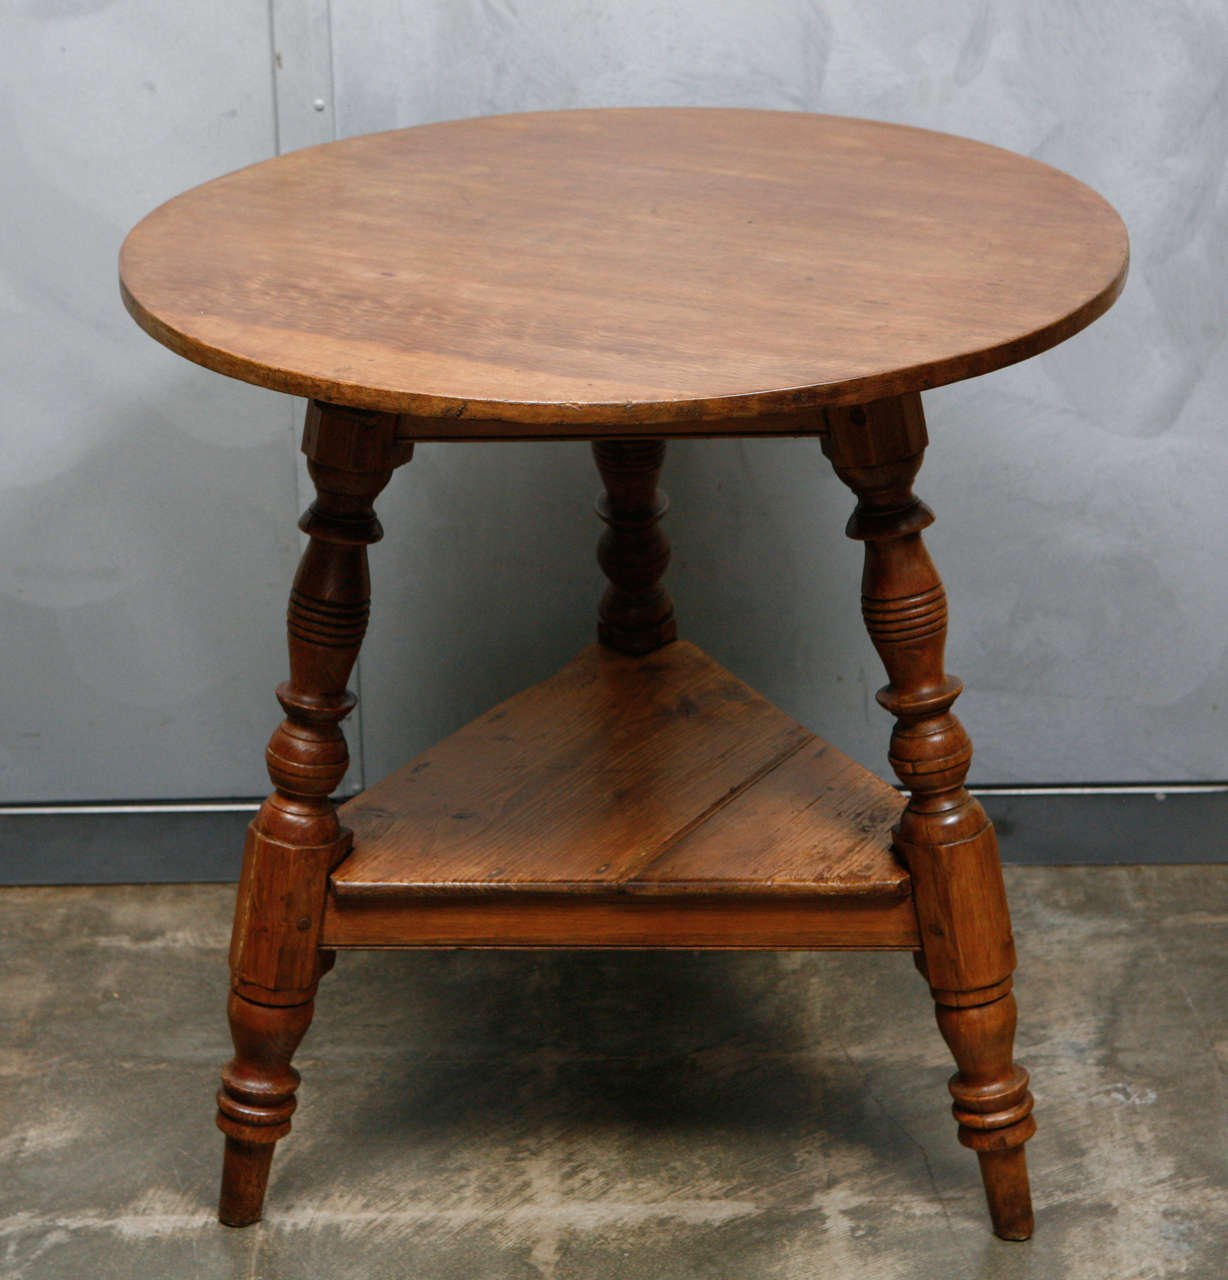 This antique cricket table is a nice example of the quintessential English occasional table. This table can be used with any seating arrangement in your home.